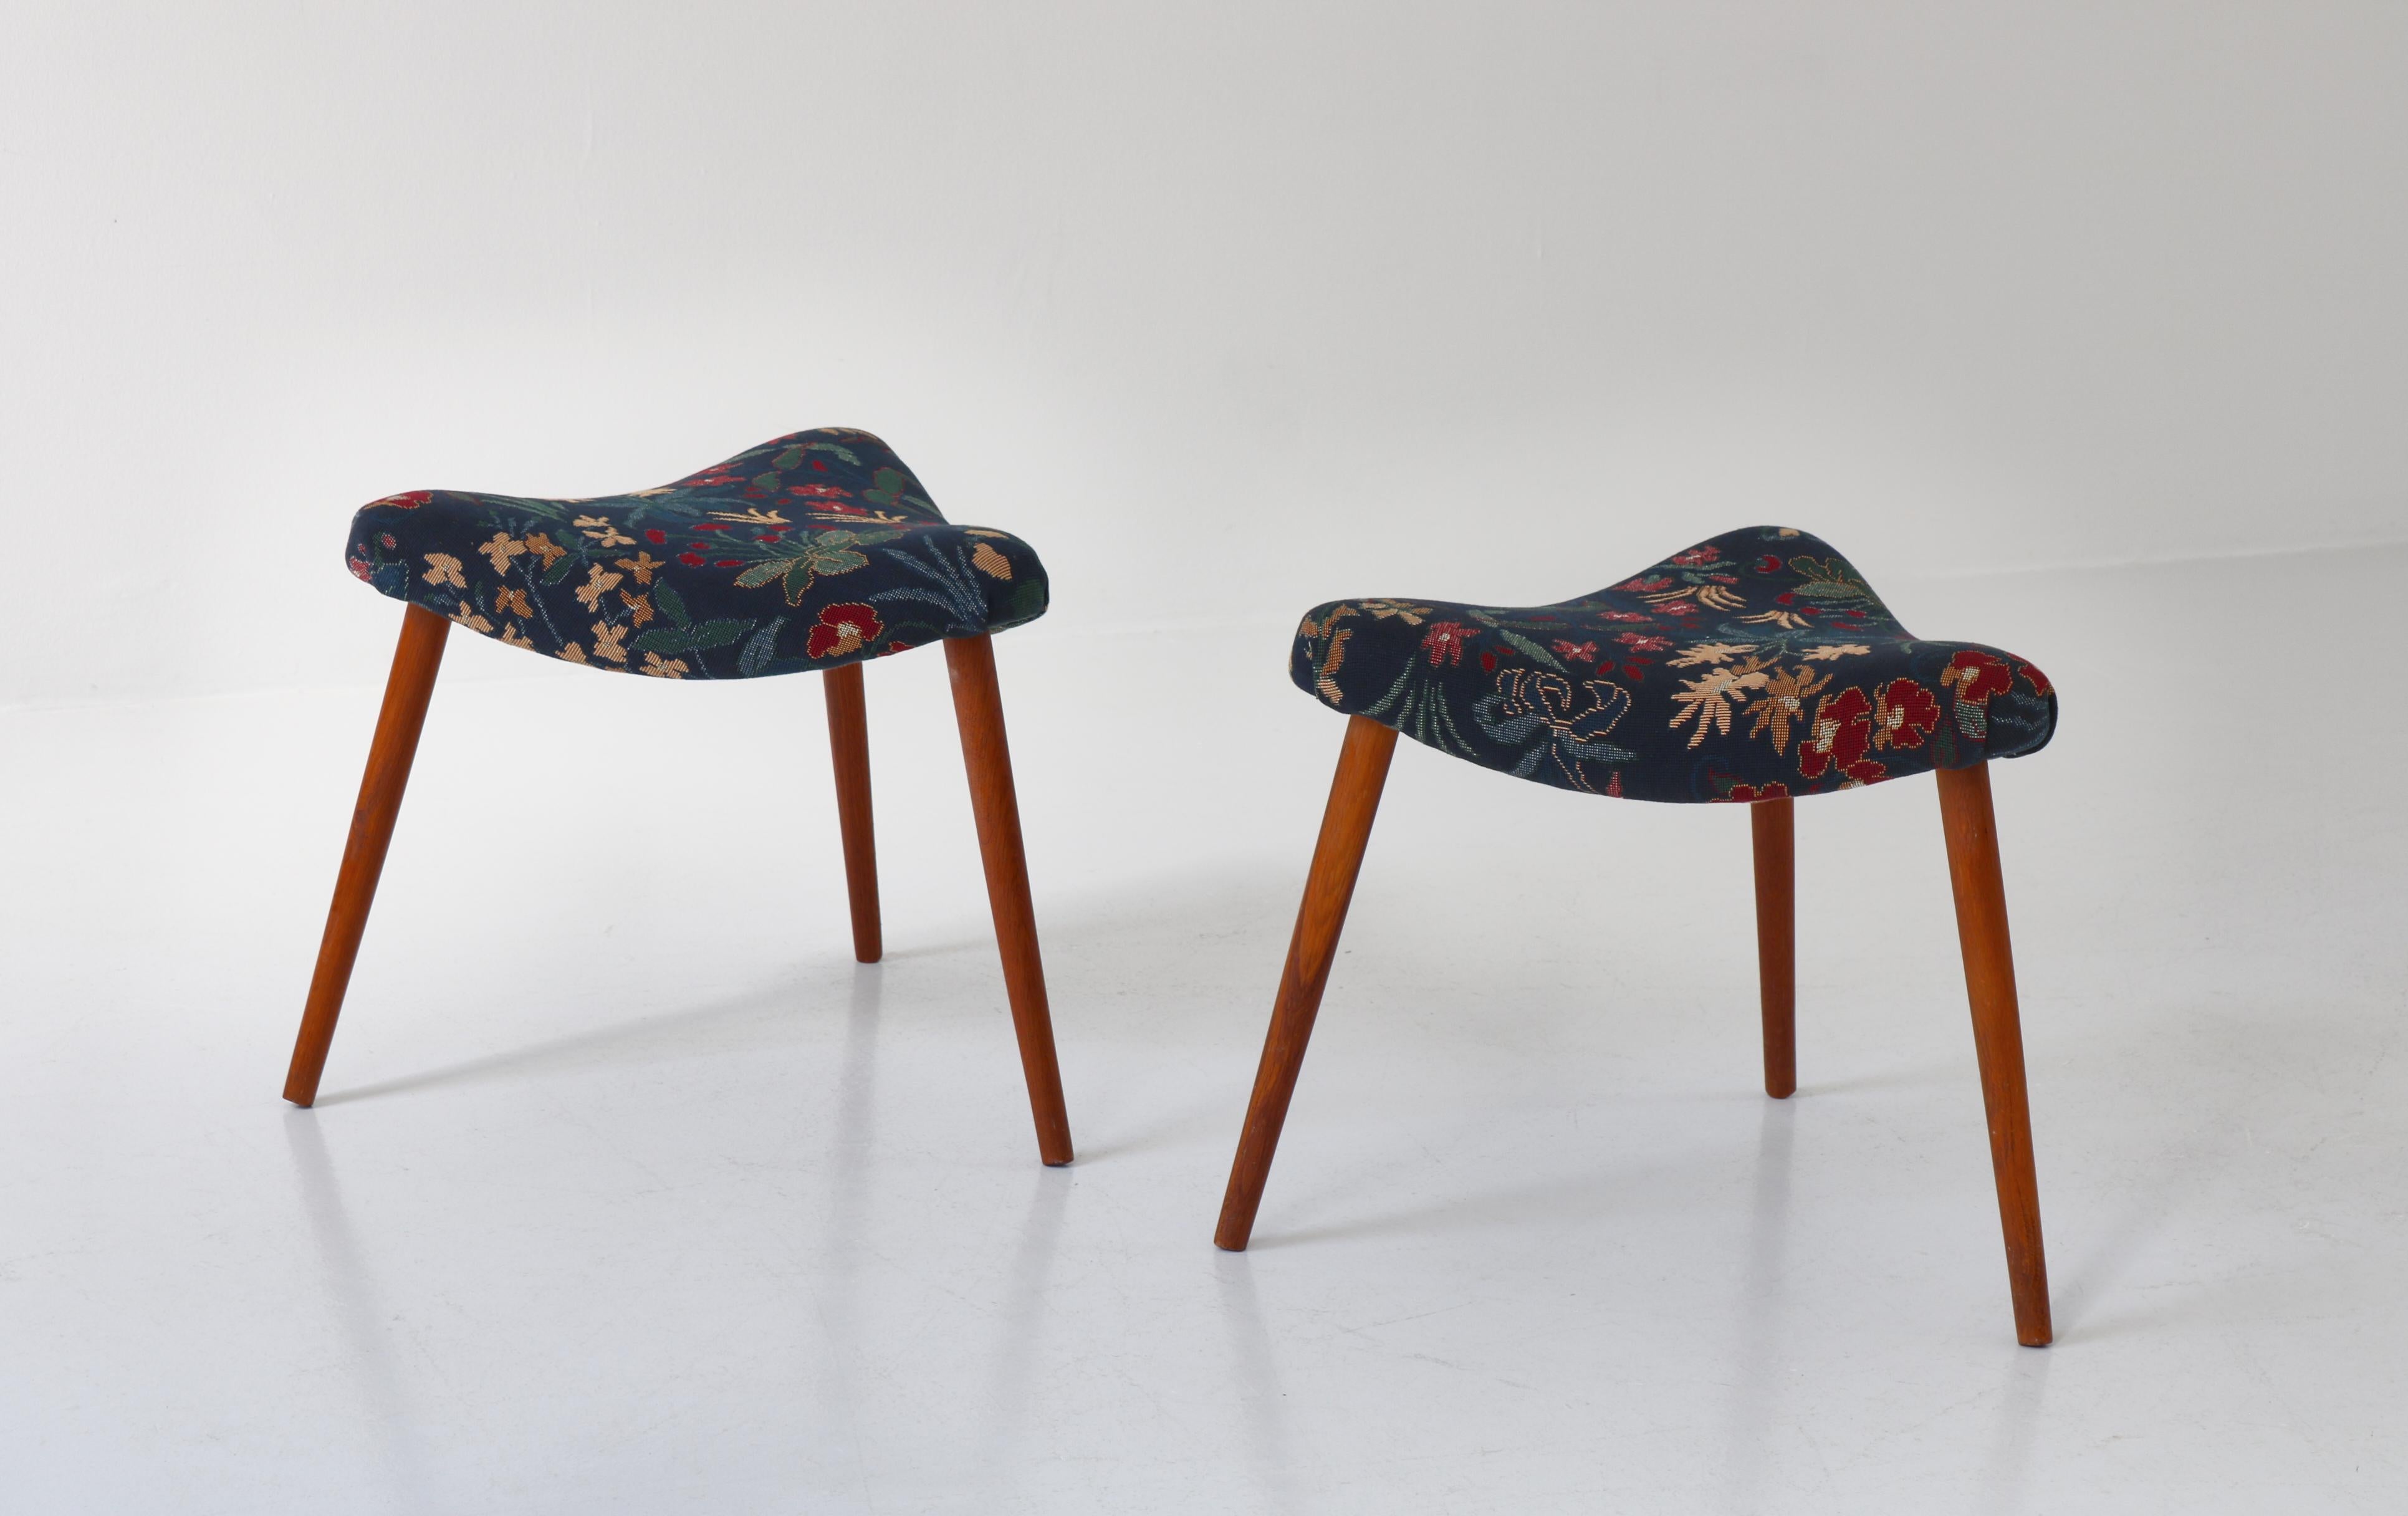 Scandinavian Modern Triangular Stools in Blue Floral Tapestry, 1950s For Sale 1